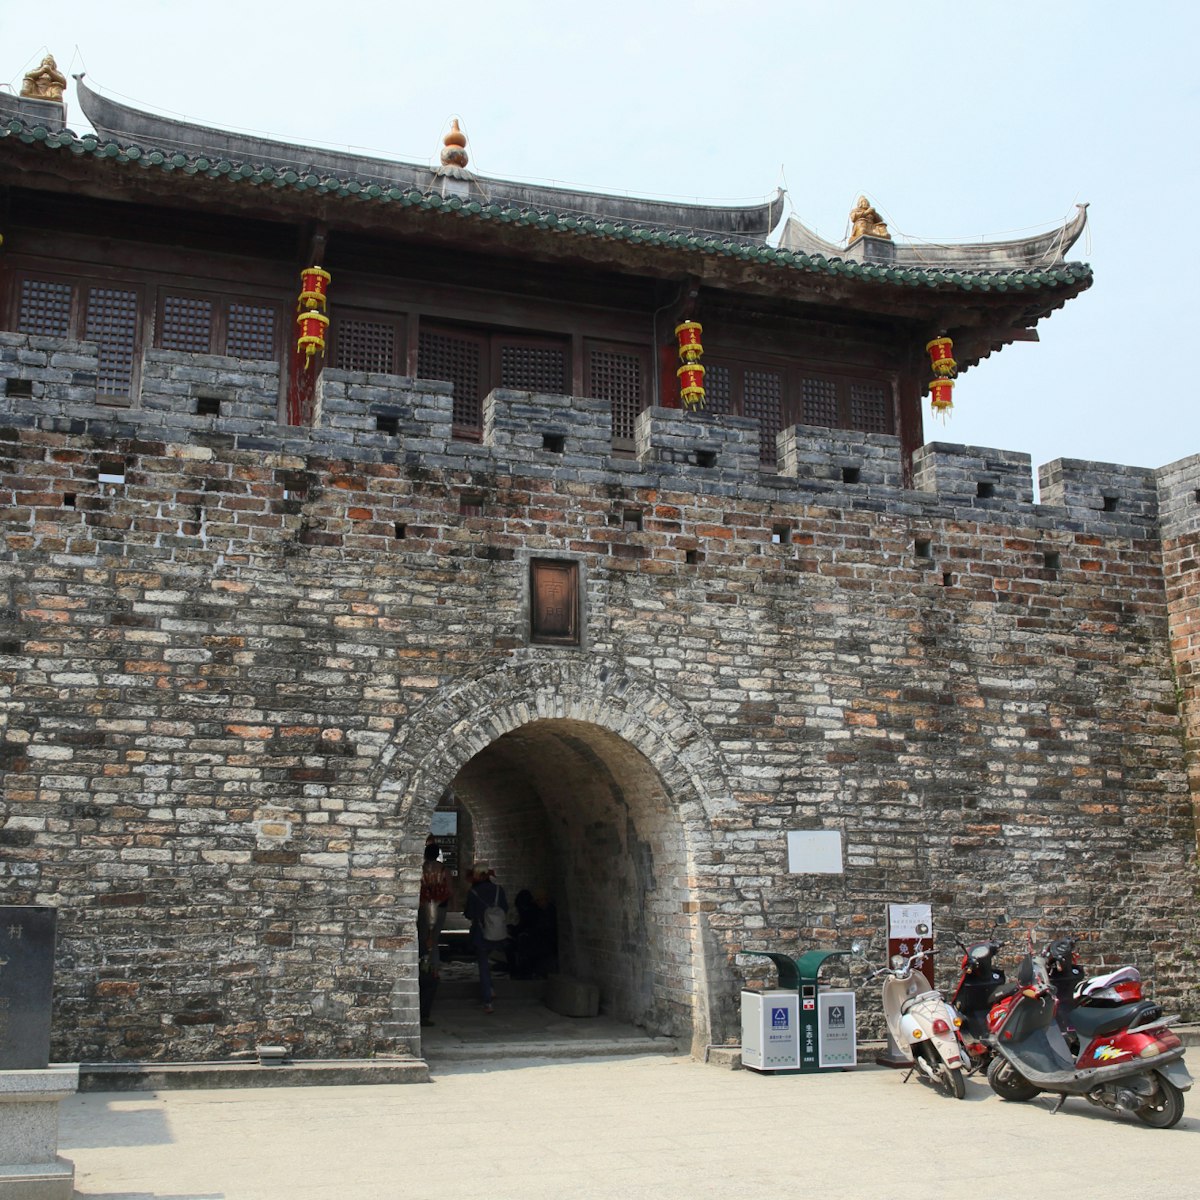 SHENZHEN, CHINA - MARCH 28, 2016: Dapeng Fortress on March 28, 2016 in Shenzhen, China. Dapeng Fortress is a historic landmark walled village in Guangdong..; Shutterstock ID 544612273; Your name (First / Last): Megan Eaves; GL account no.: 65050; Netsuite department name: Online Editorial; Full Product or Project name including edition: Destination image - North Asia